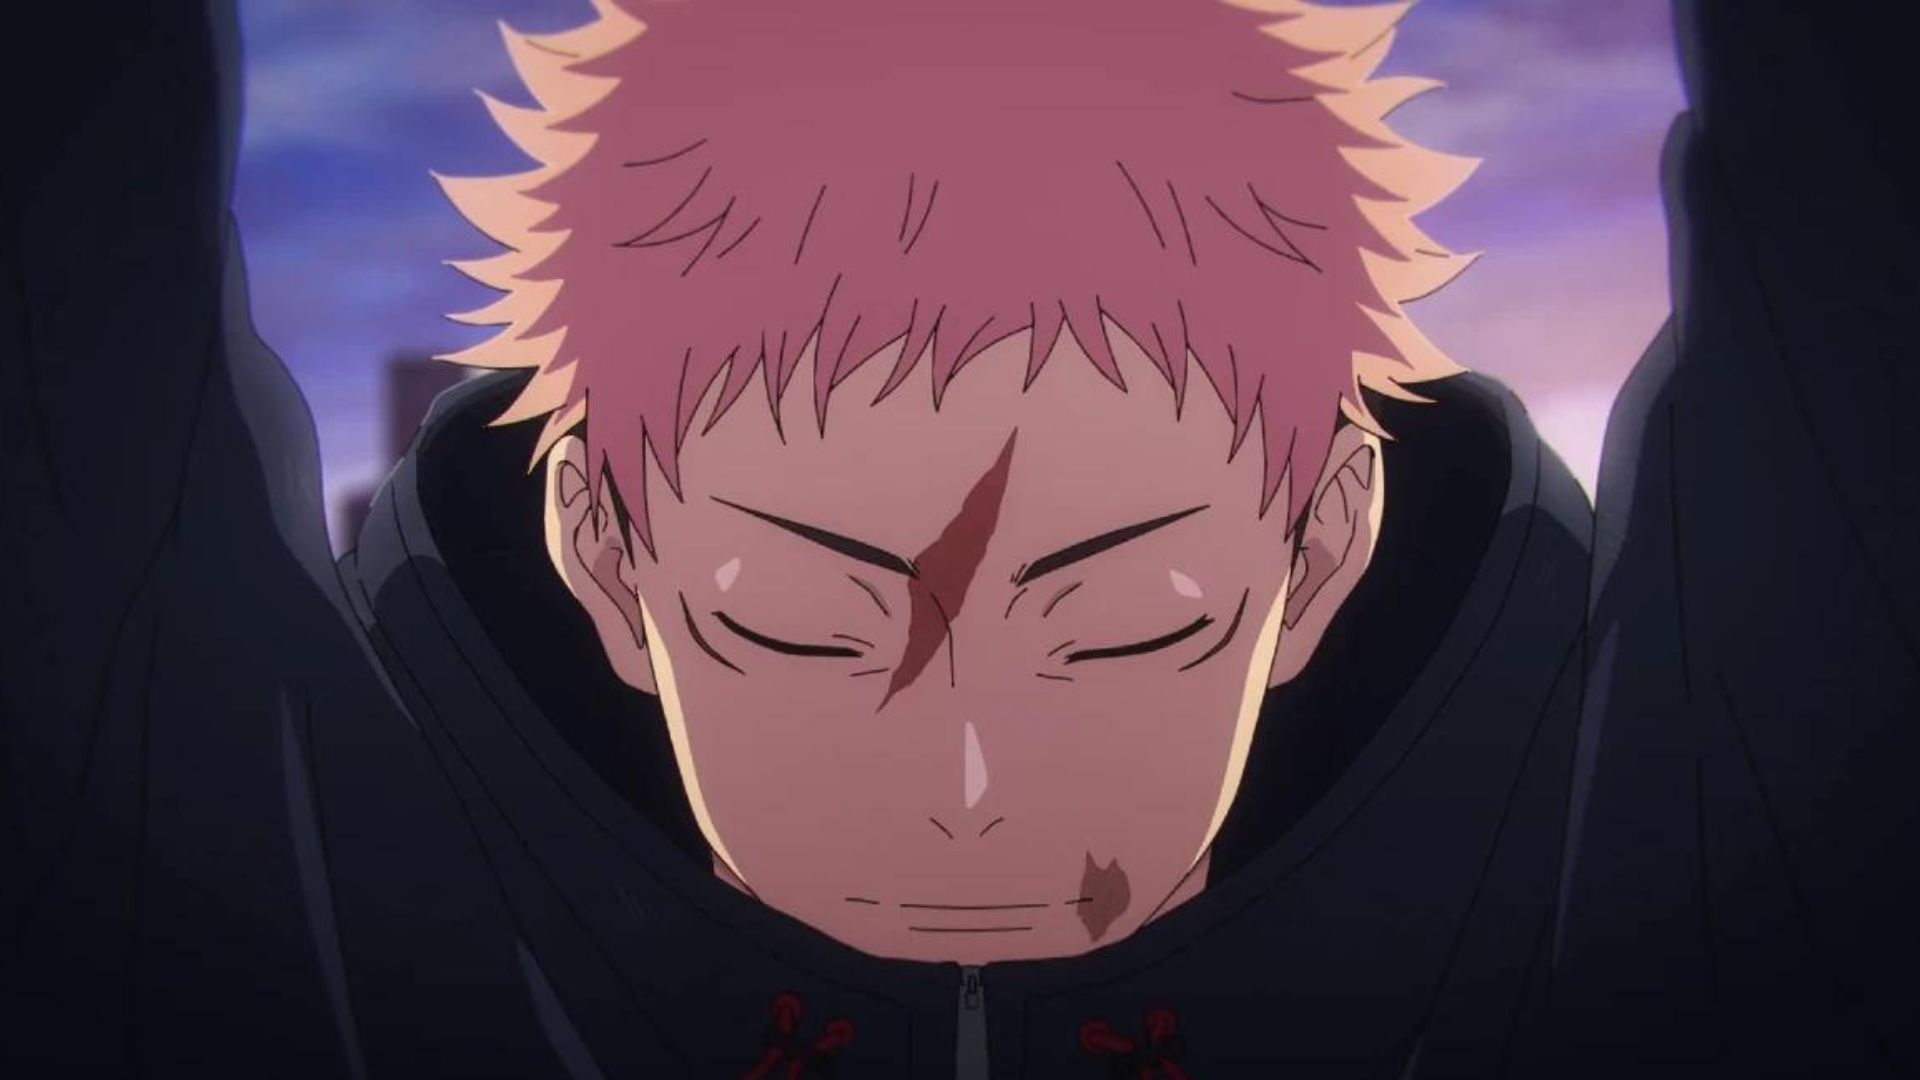 Yuji as seen in the last frame of the second season of Jujutsu Kaisen